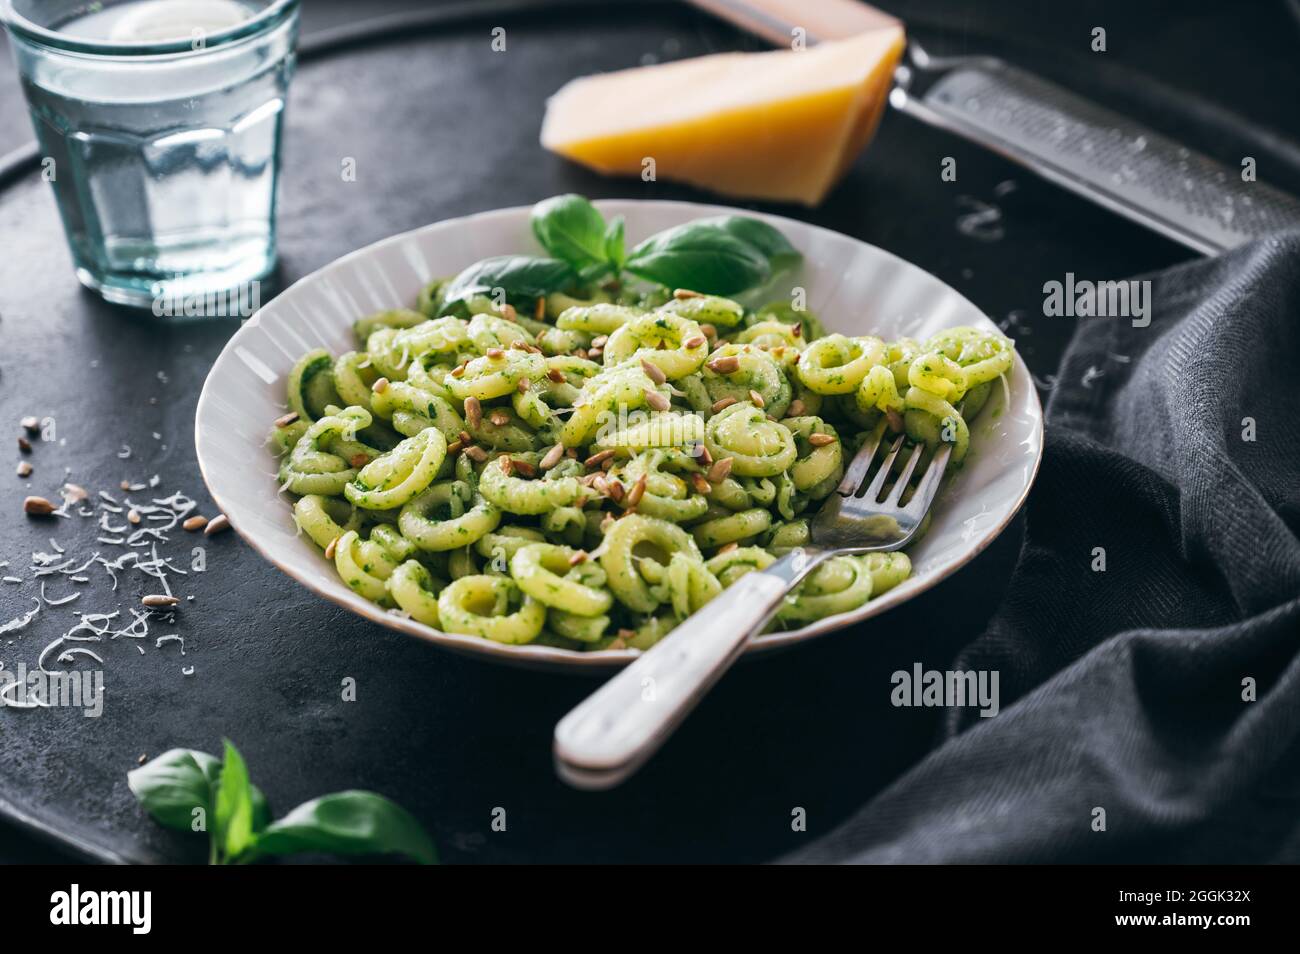 Volanti with green pesto, parmesan and roasted sunflower seeds Stock Photo